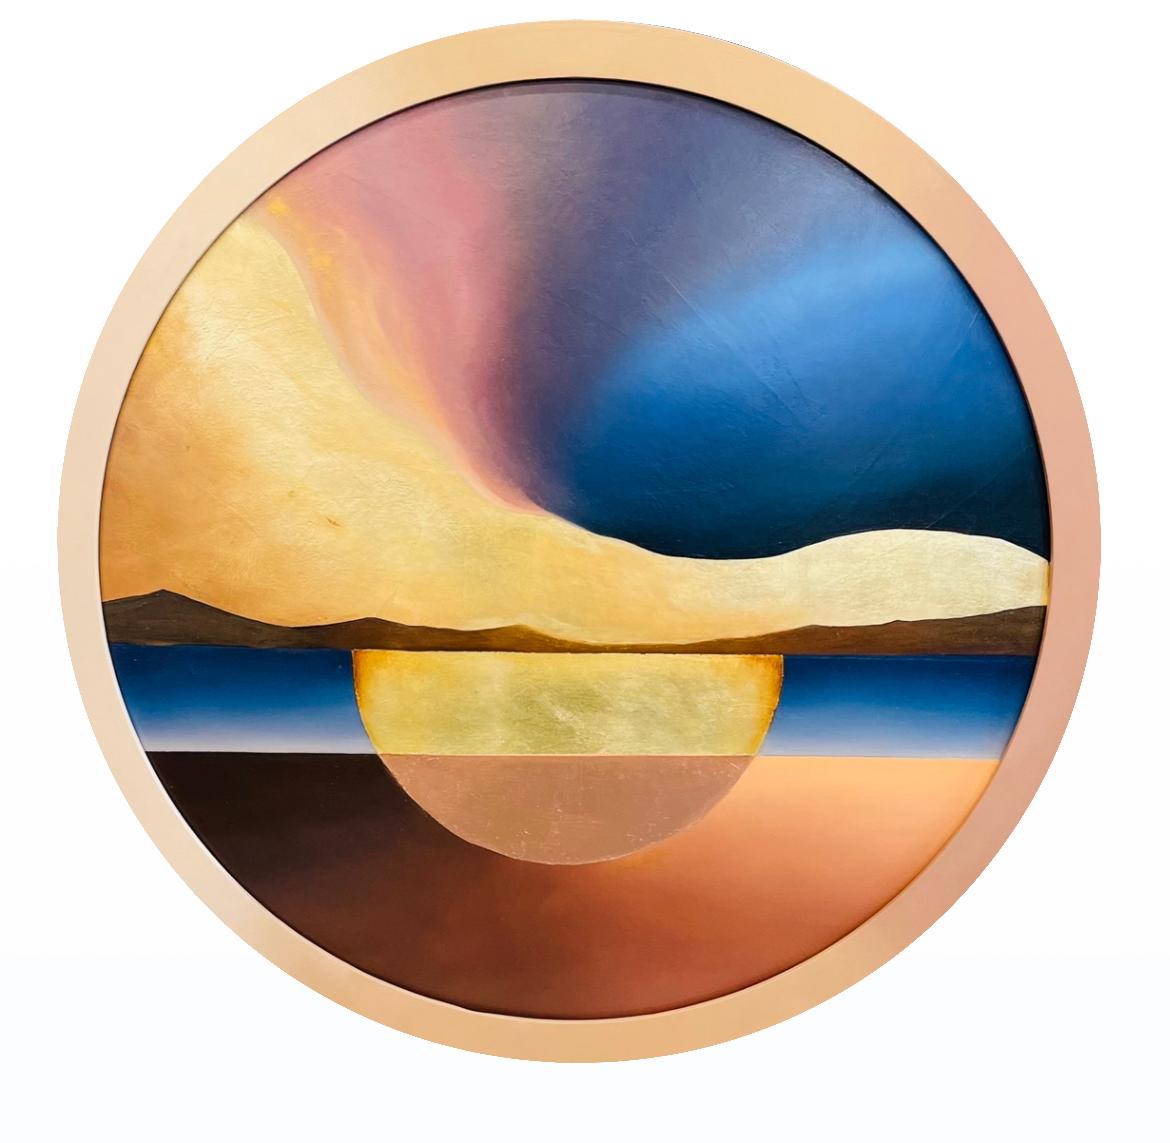 In the Eye of the Wave by Lyora Pissarro, Represented by Tuleste Factory